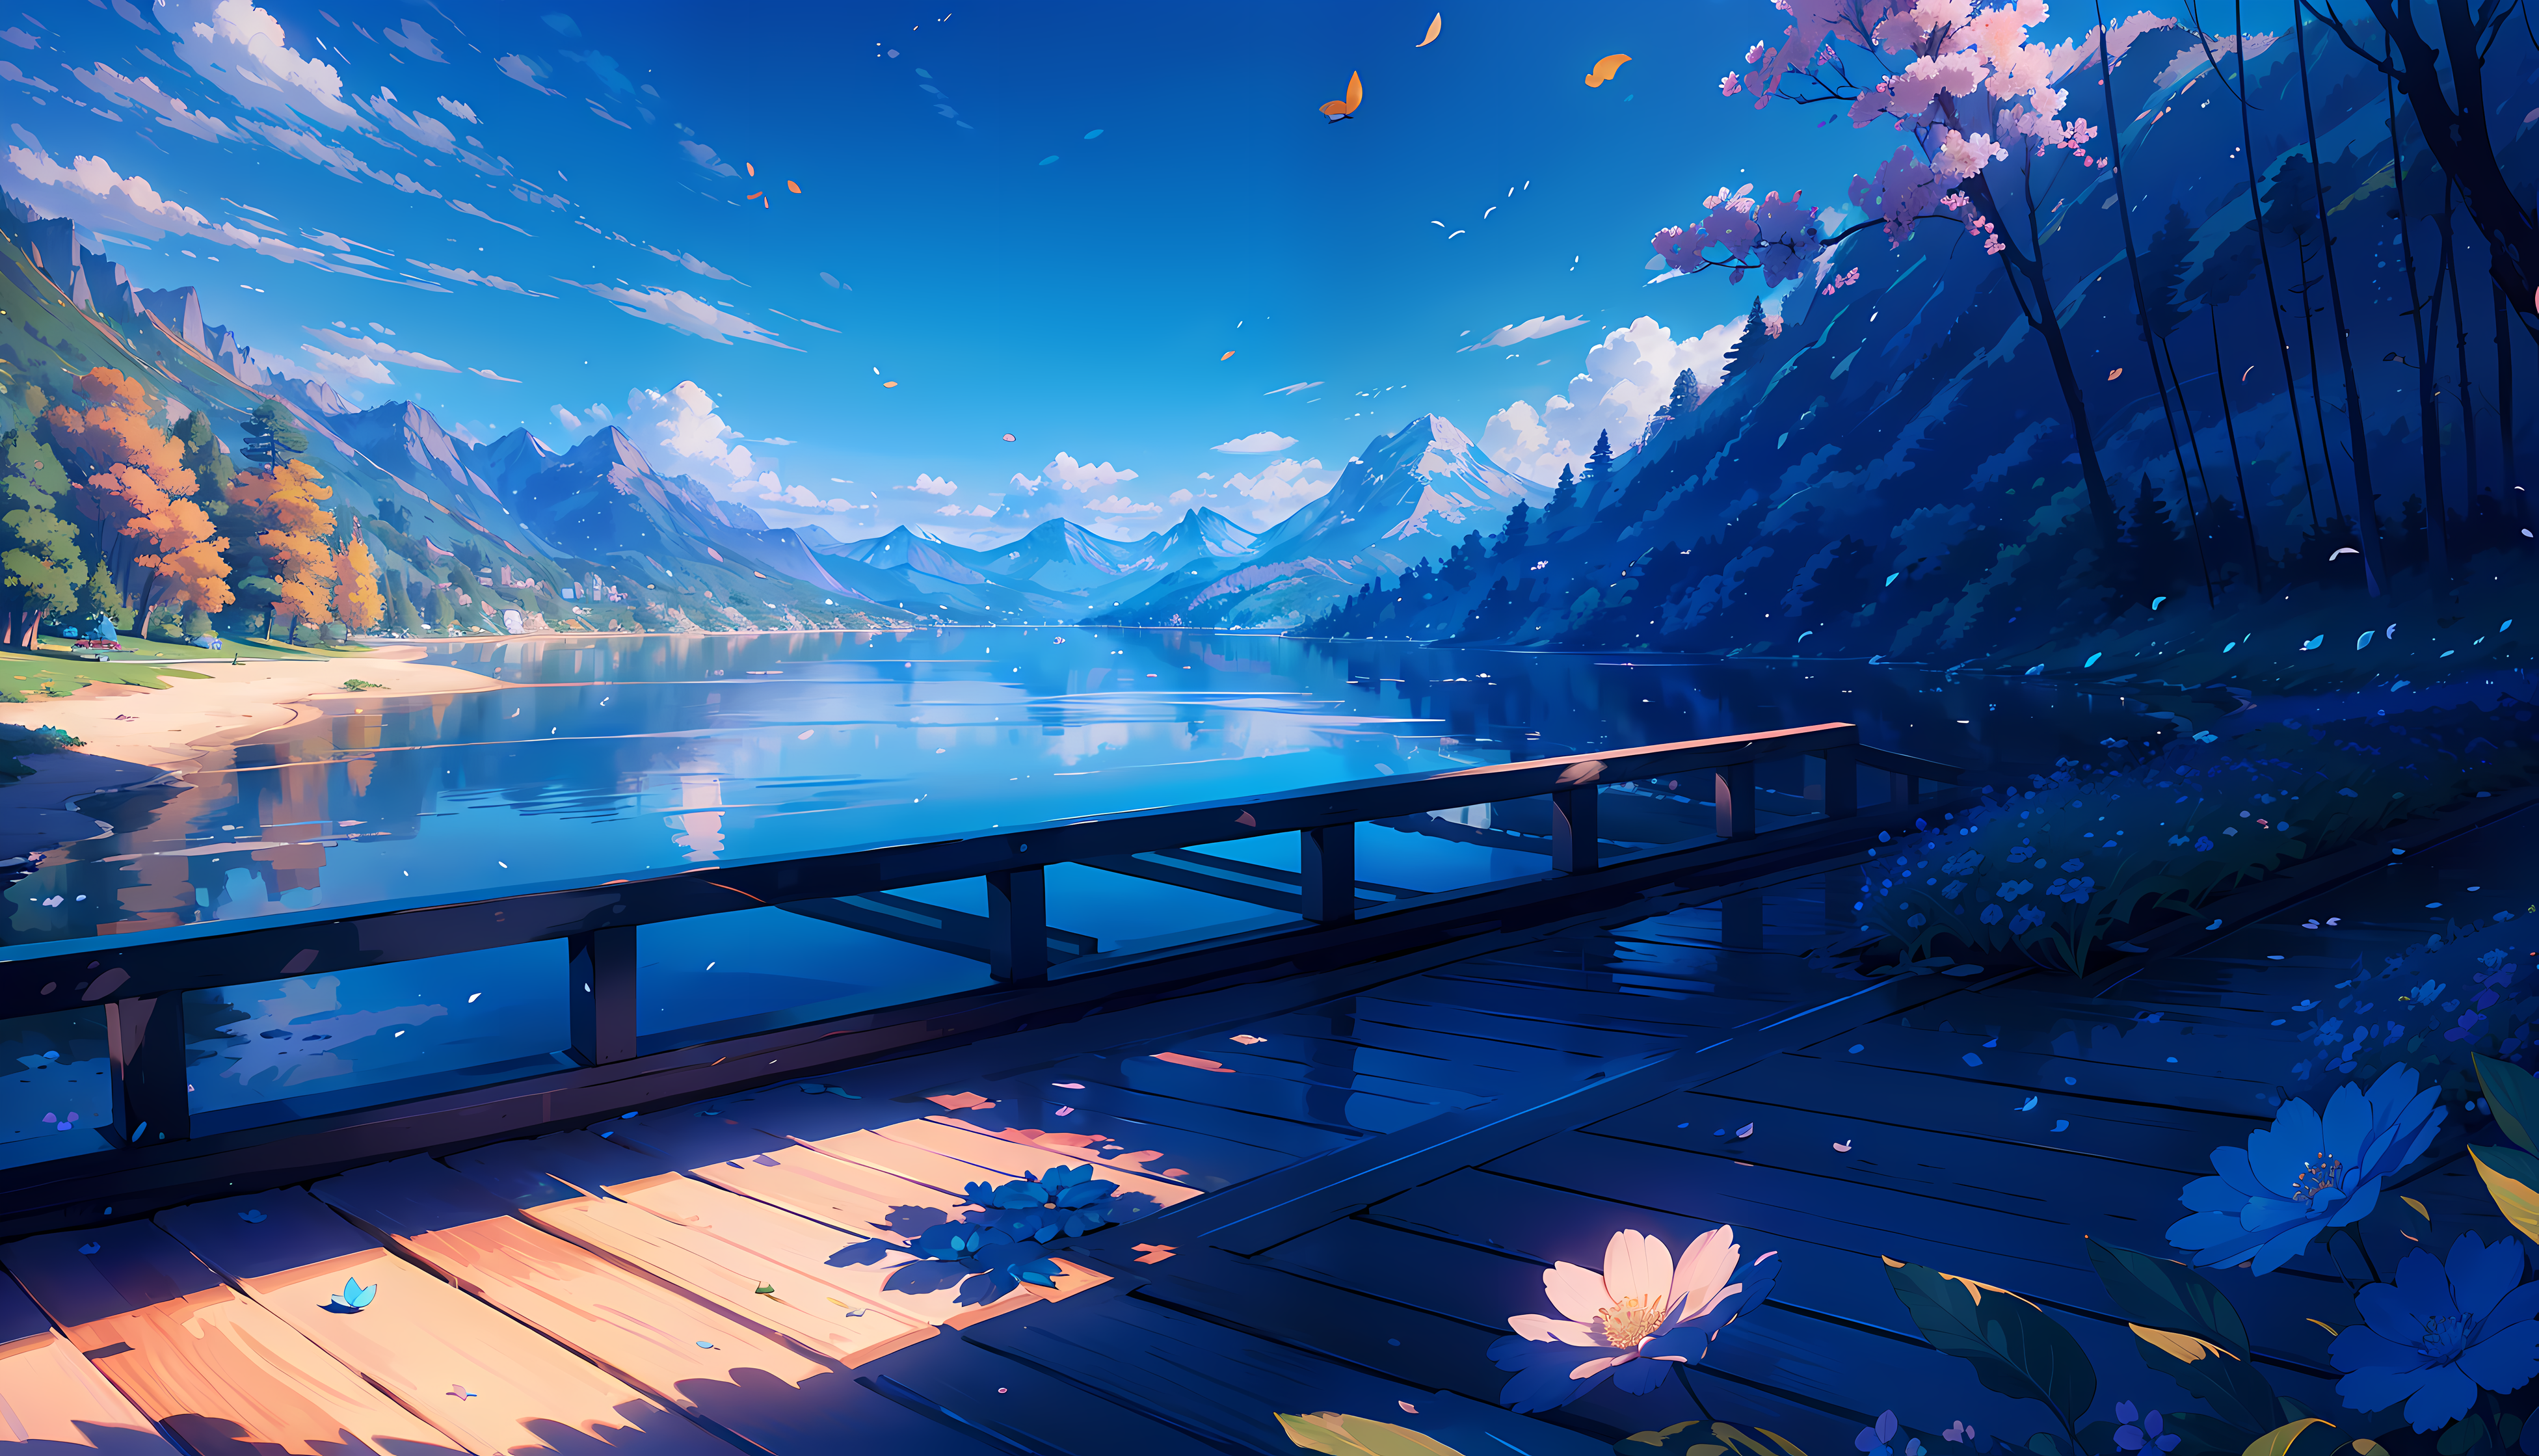  Anime Landscape HD Wallpapers and Backgrounds